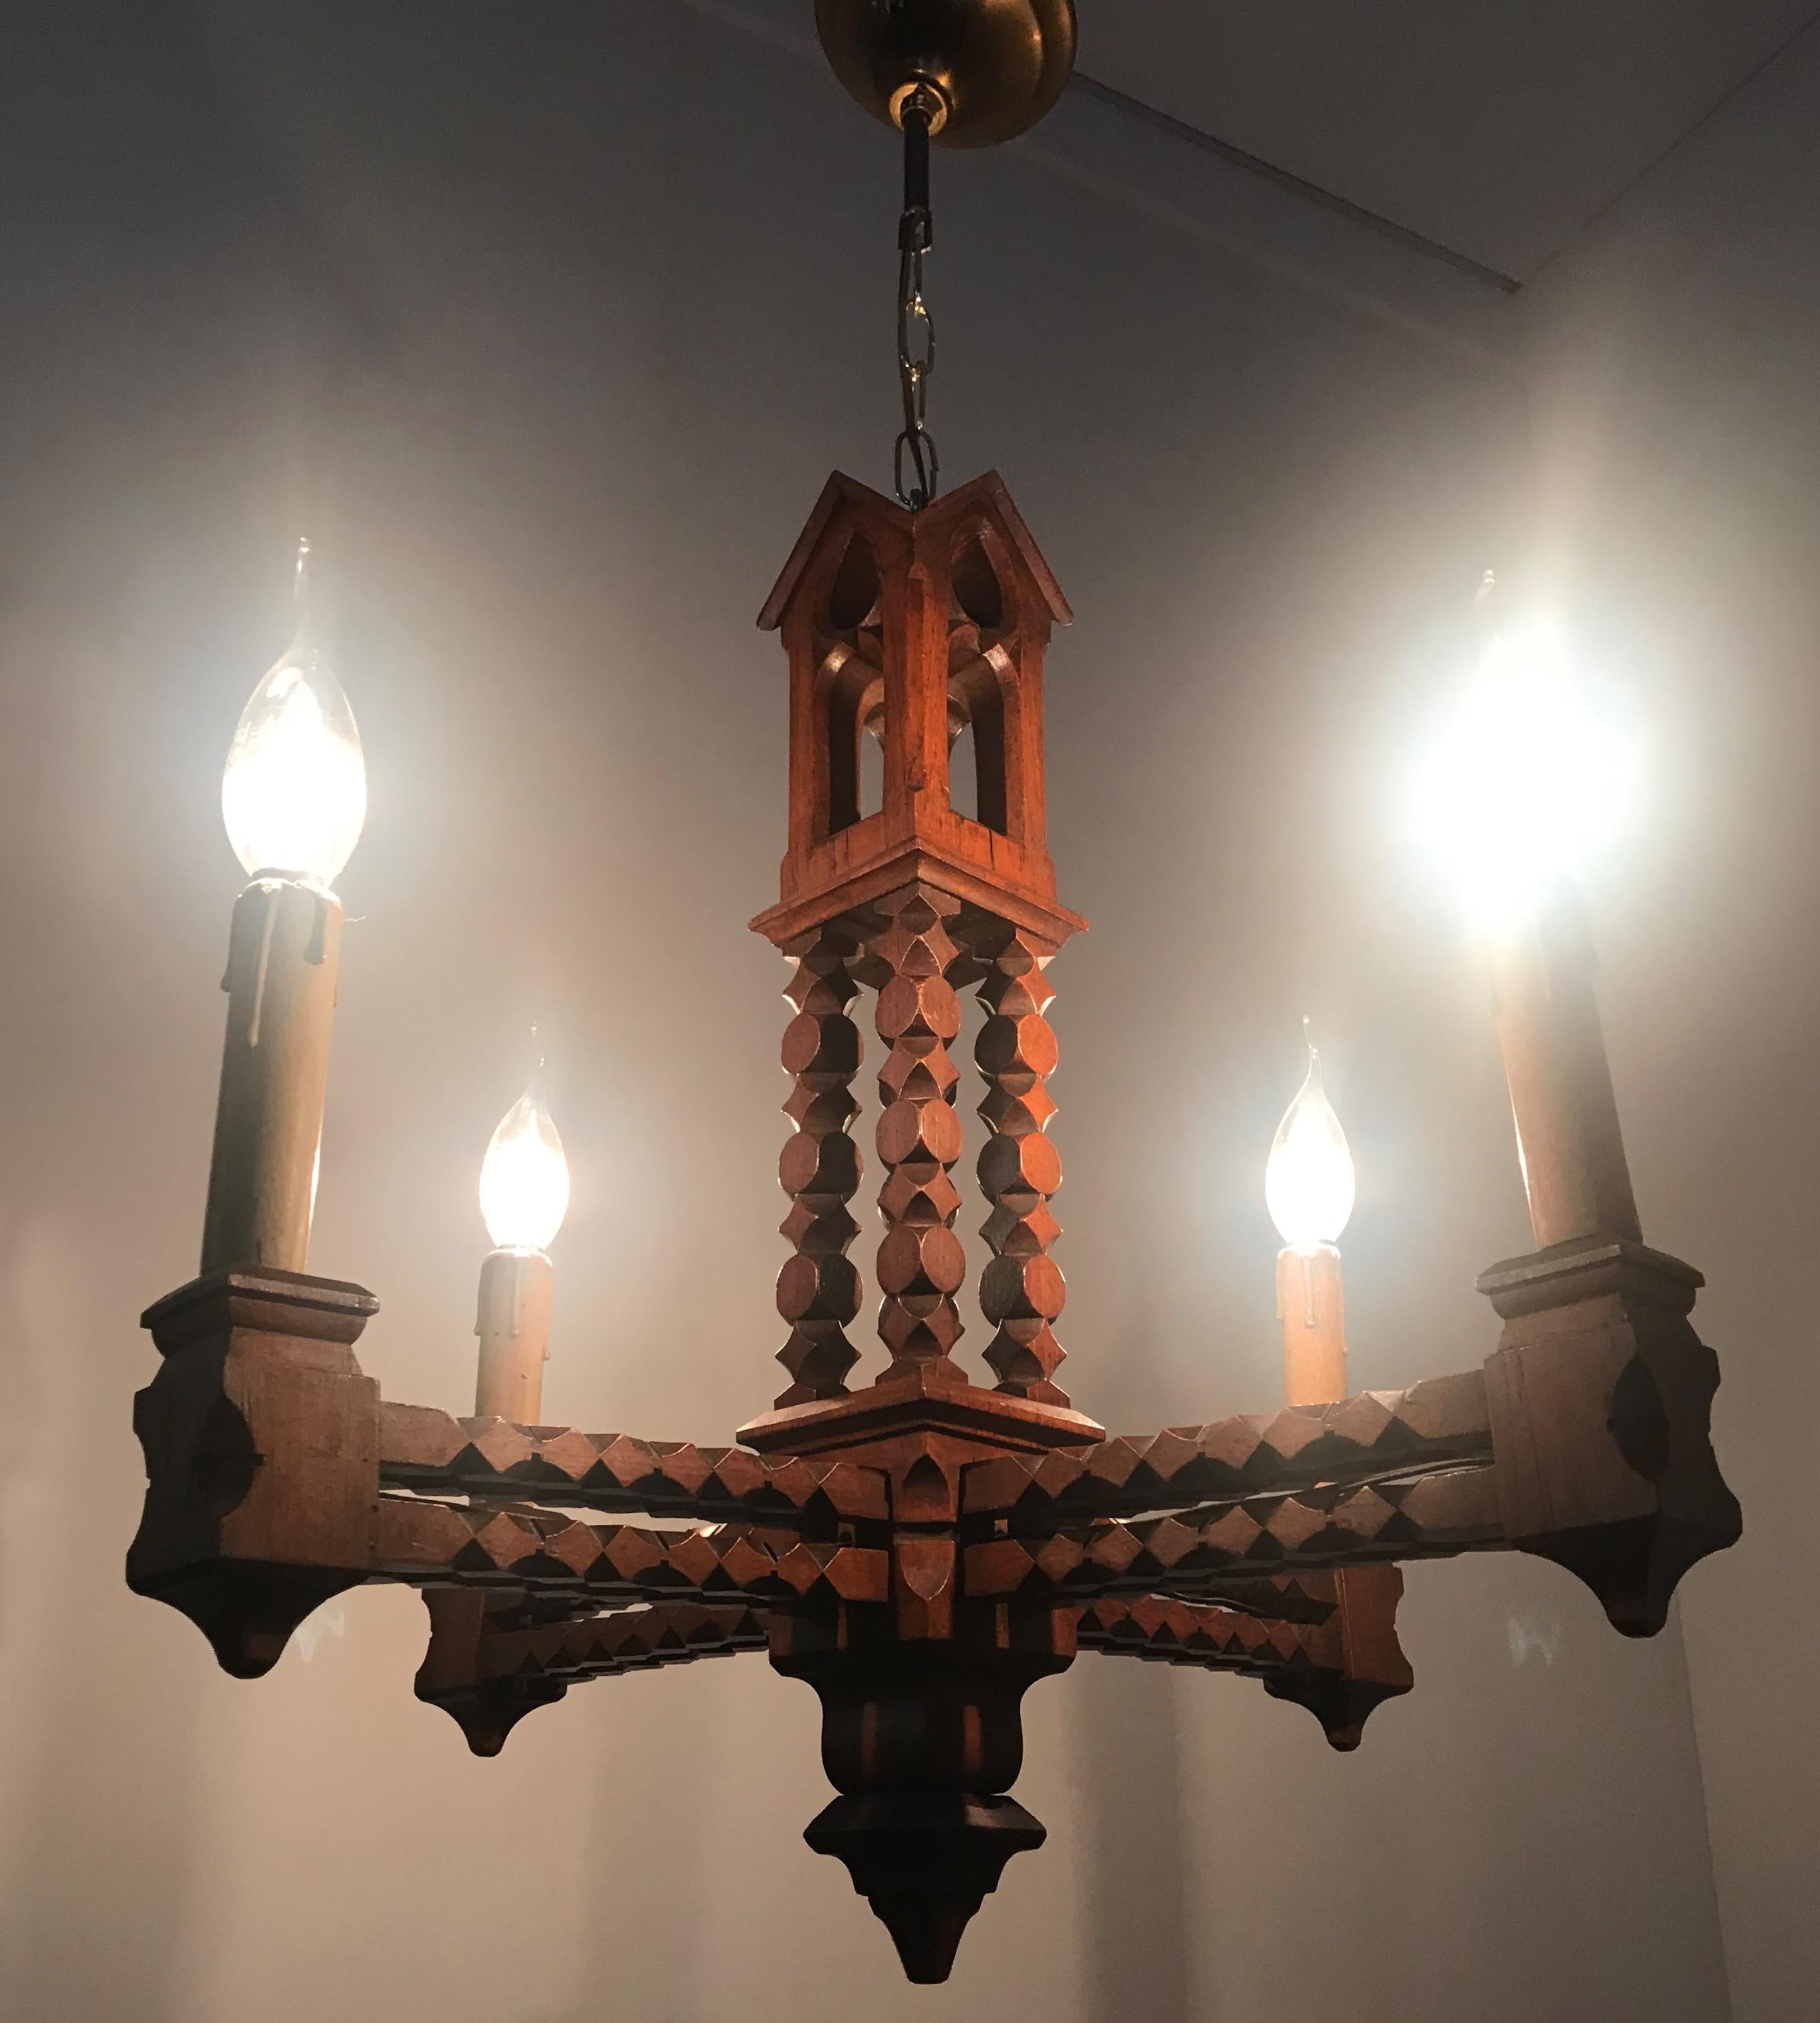 Early 1900 Arts & Crafts Era Gothic Revival Pendant Light, Chandelier or Fixture 11